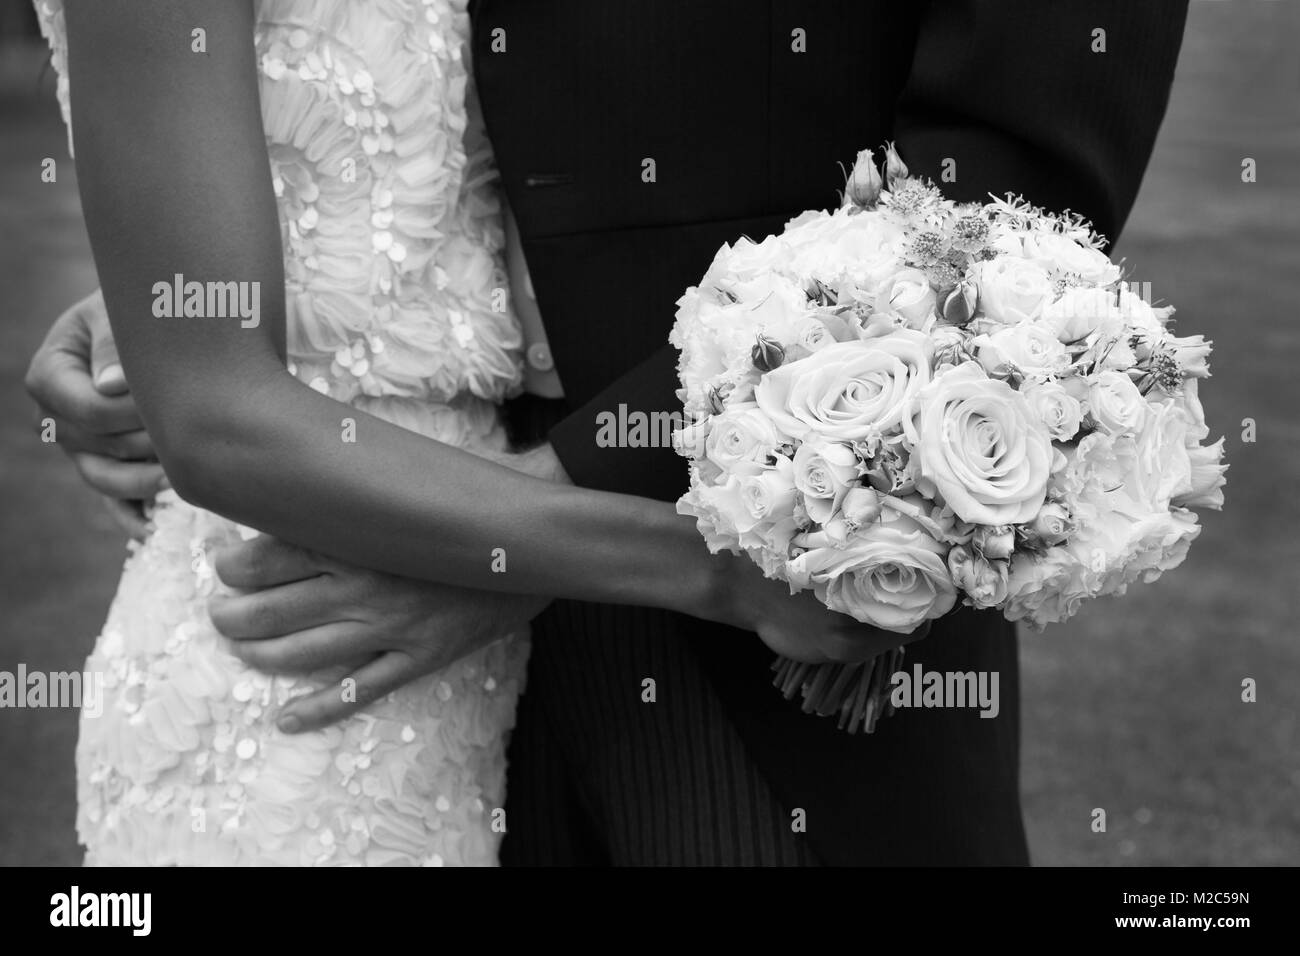 Bride and groom, face to face, bride holding wedding bouquet, mid section, black and white Stock Photo